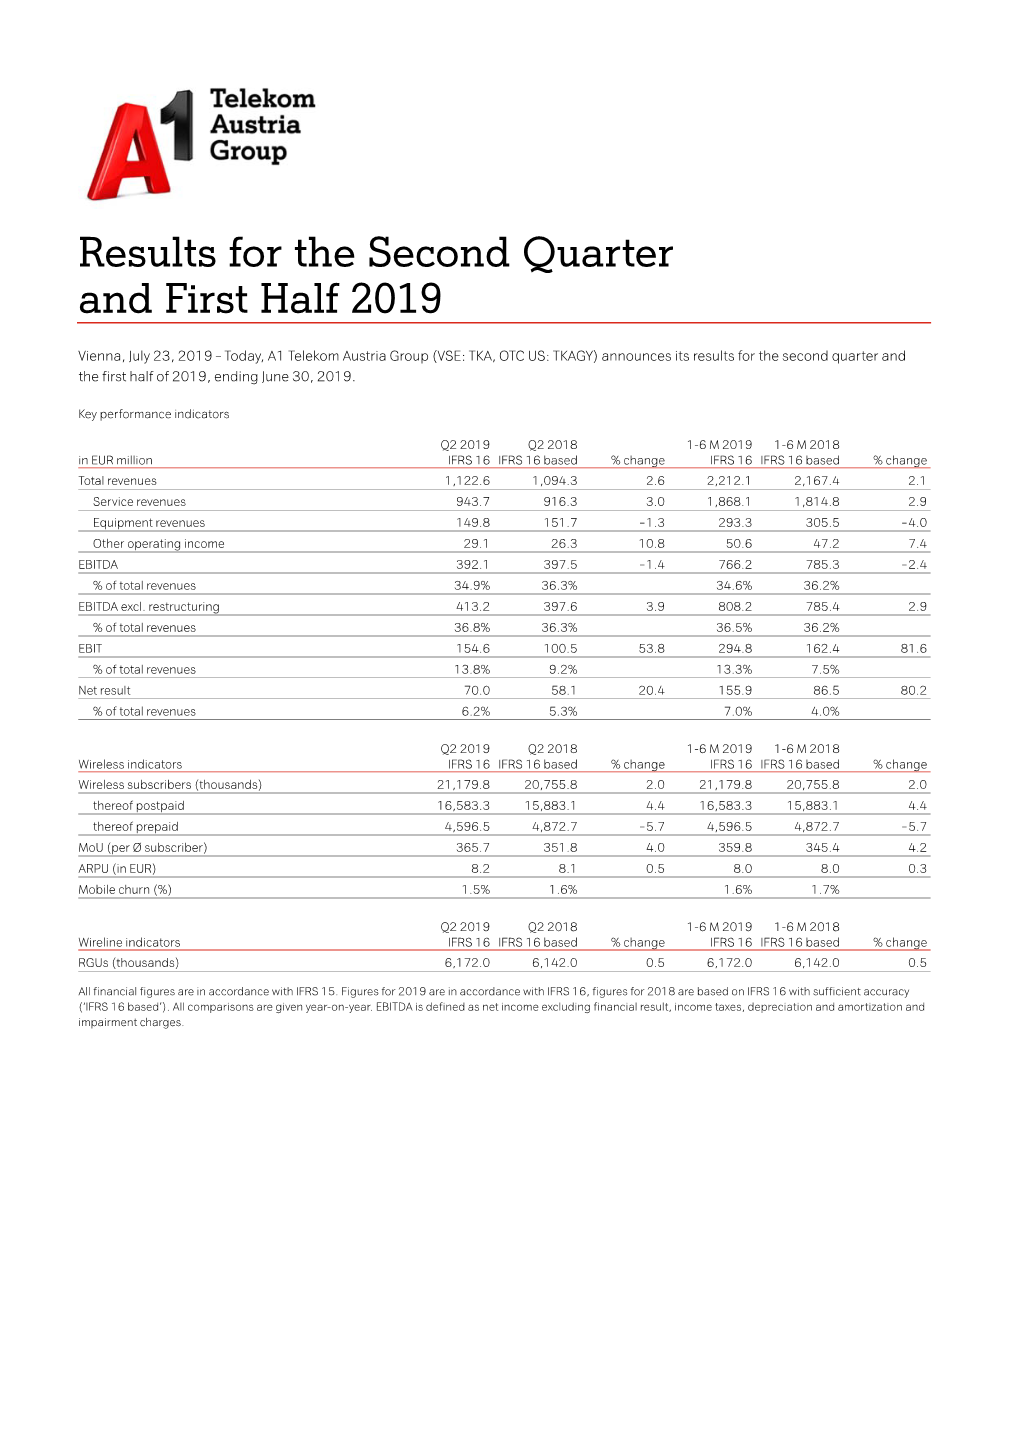 Results for the Second Quarter and First Half 2019